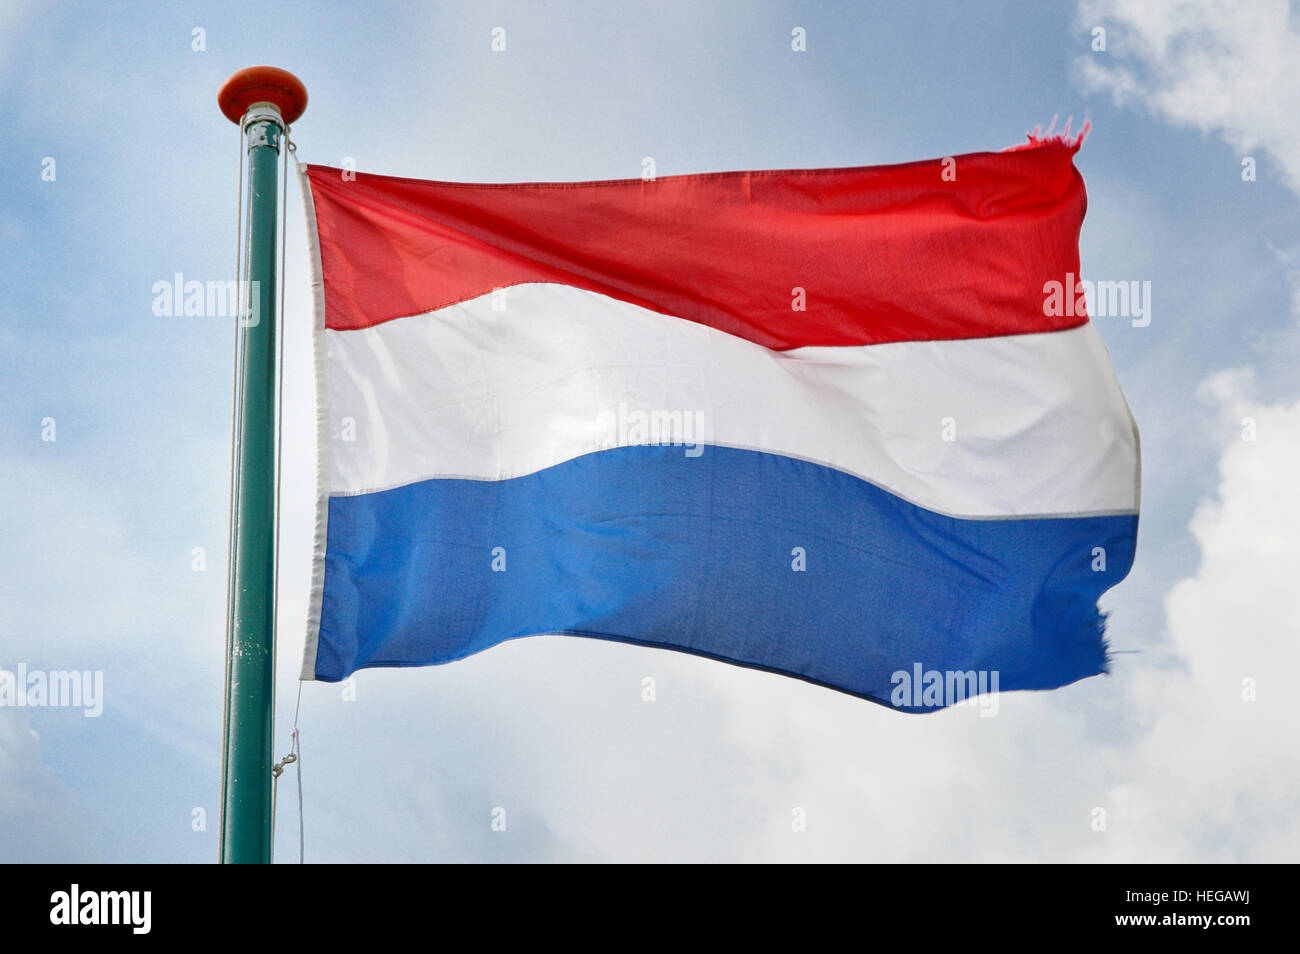 Netherlands flag waving in the wind outdoors Stock Photo